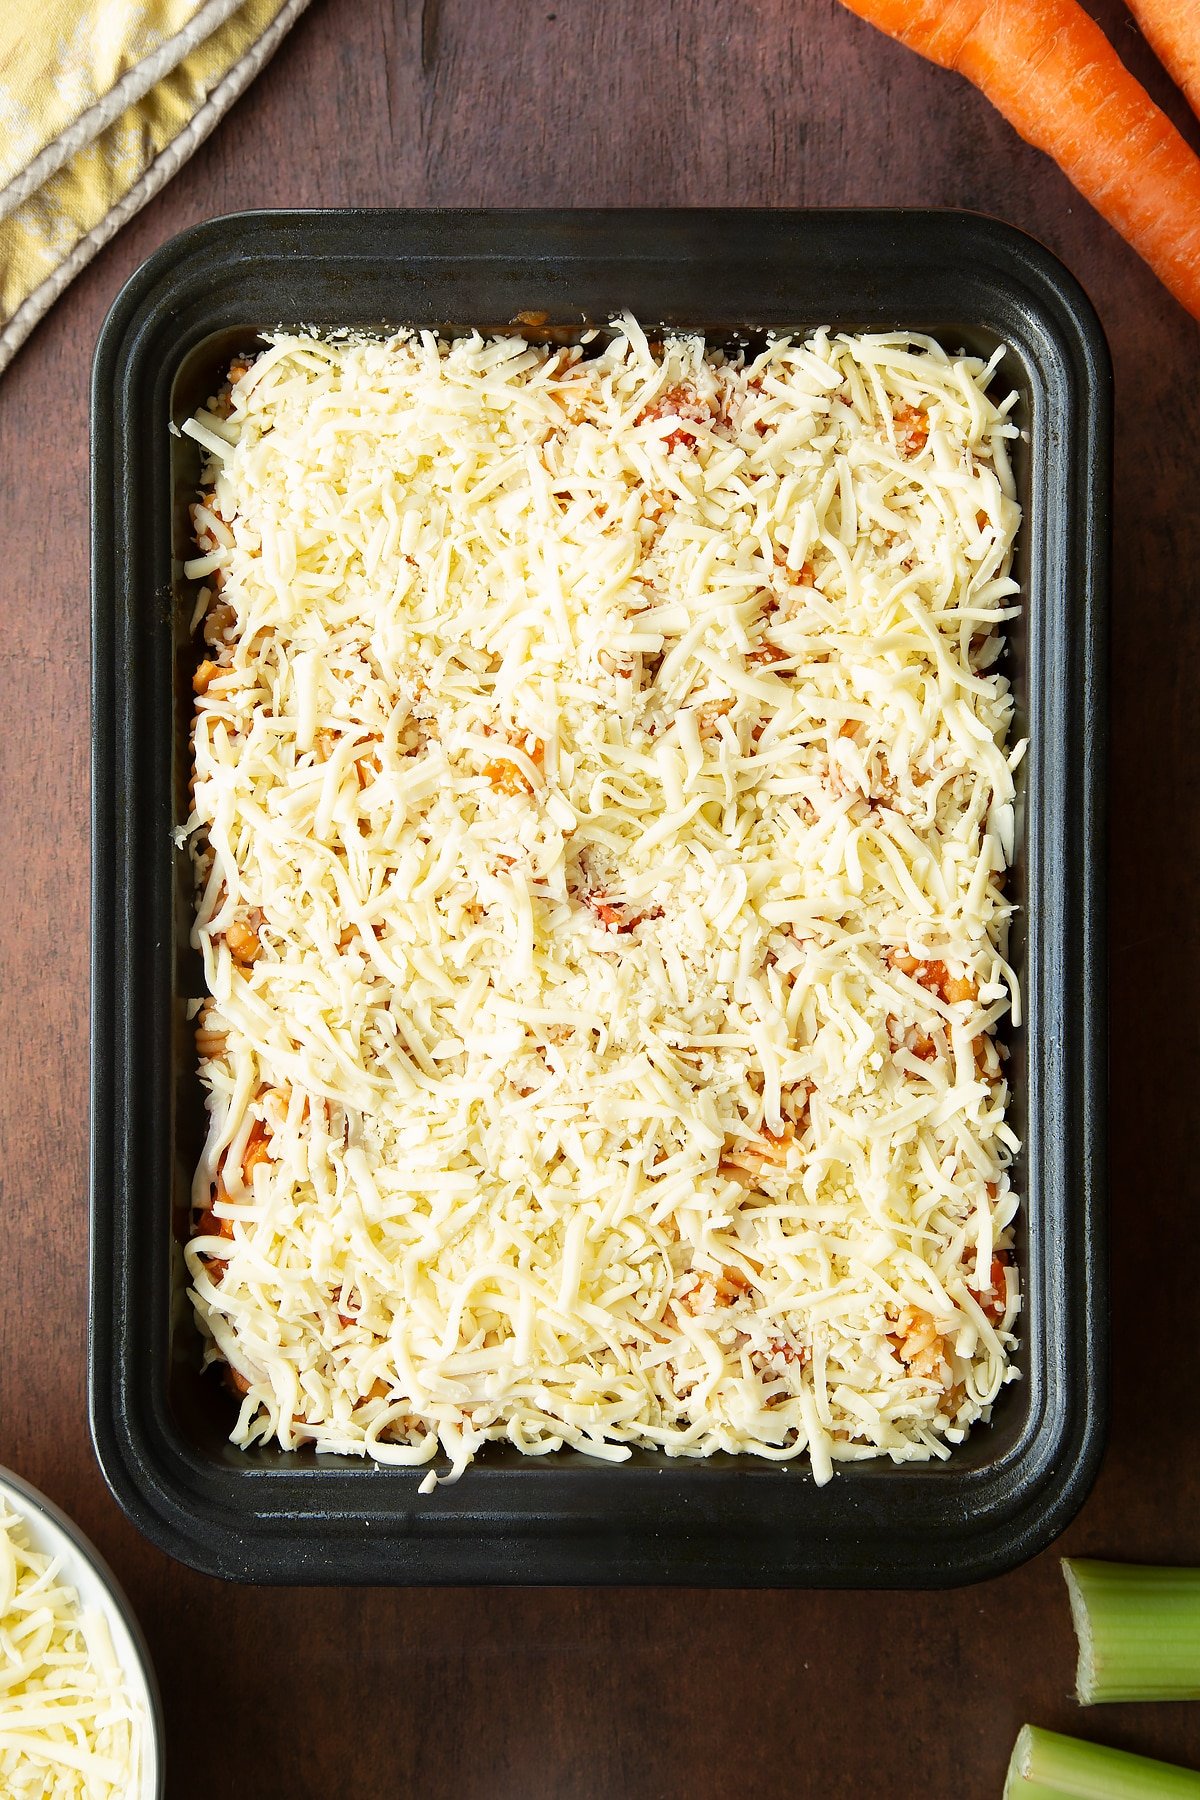 Baked beans and pasta in a tray, topped with shredded mozzarella. Ingredients to make pasta and baked beans surround the tray.